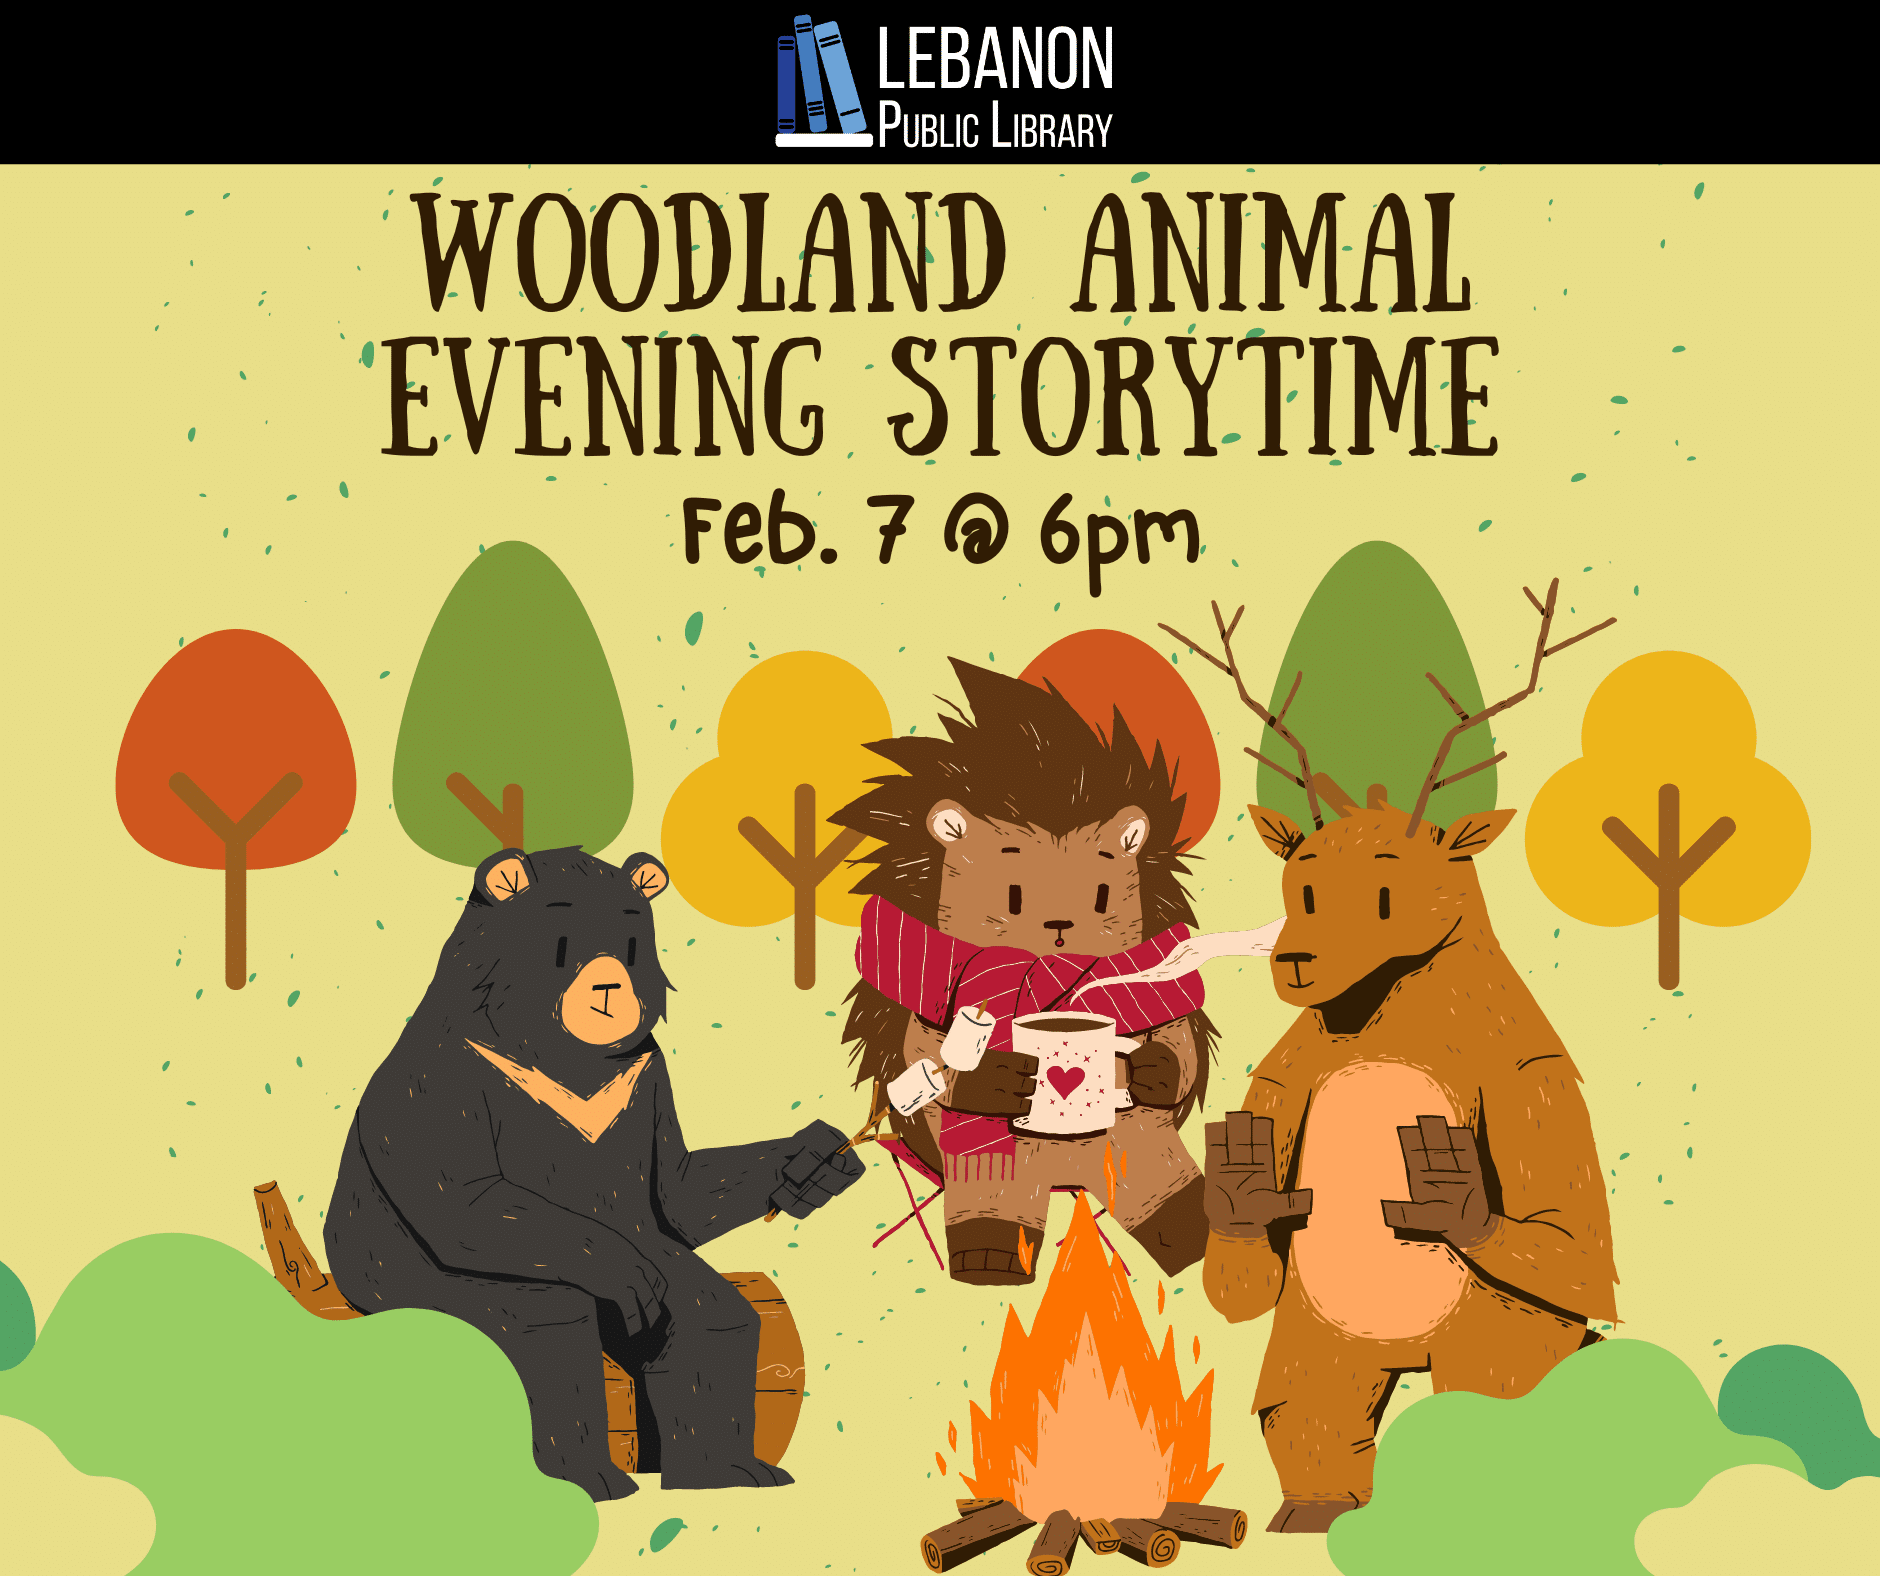 Woodland Animal Evening Storytime, February 7th at 6 p.m.